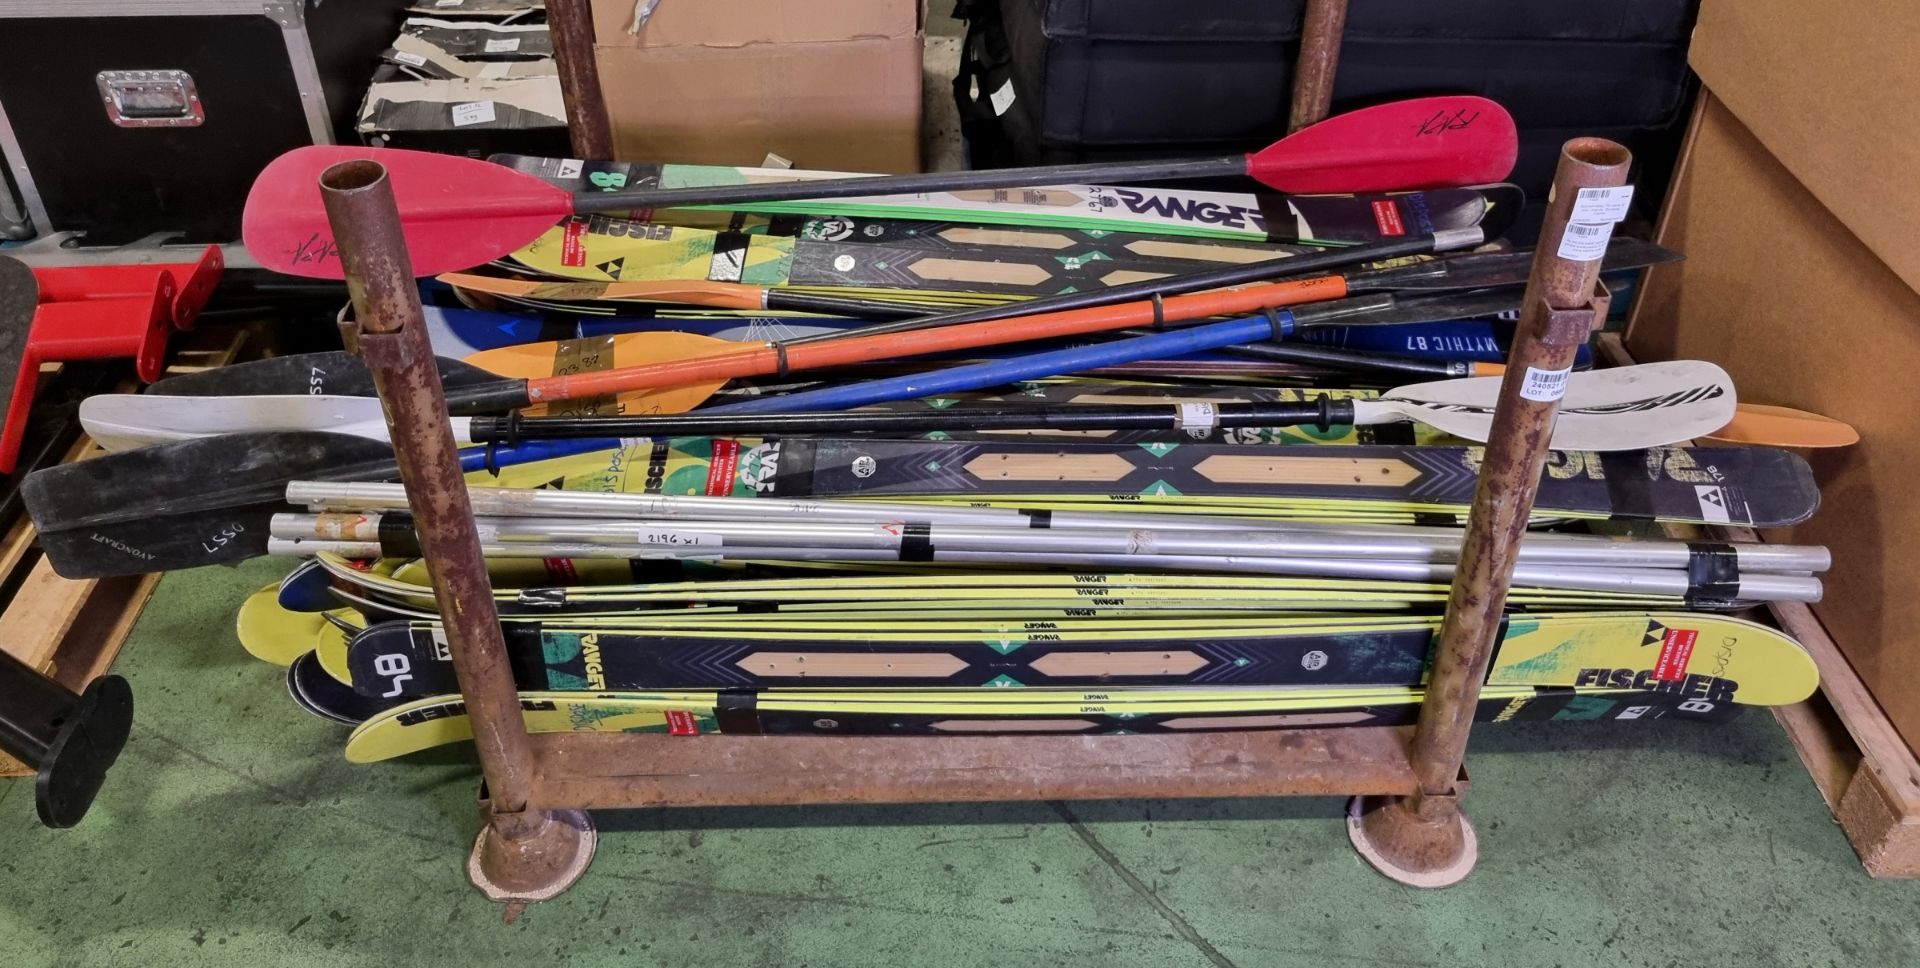 Approximately 75x pairs of skis - brands: Dynastar, Fischer - Image 2 of 6